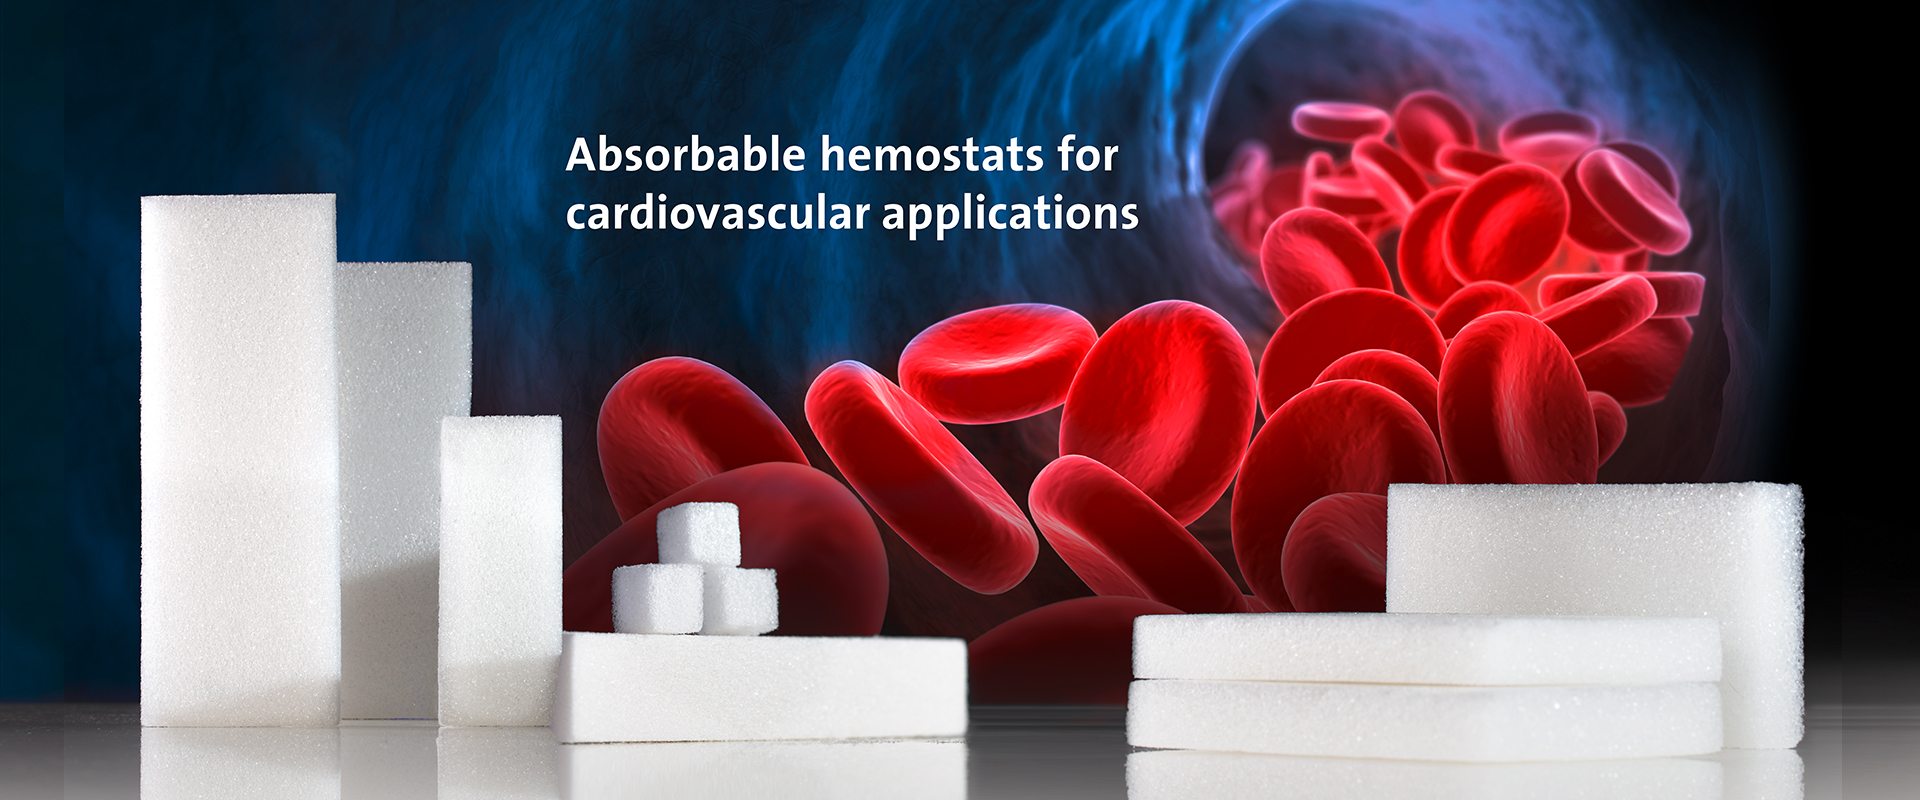 Absorbable hemostats for cardiovascular applications